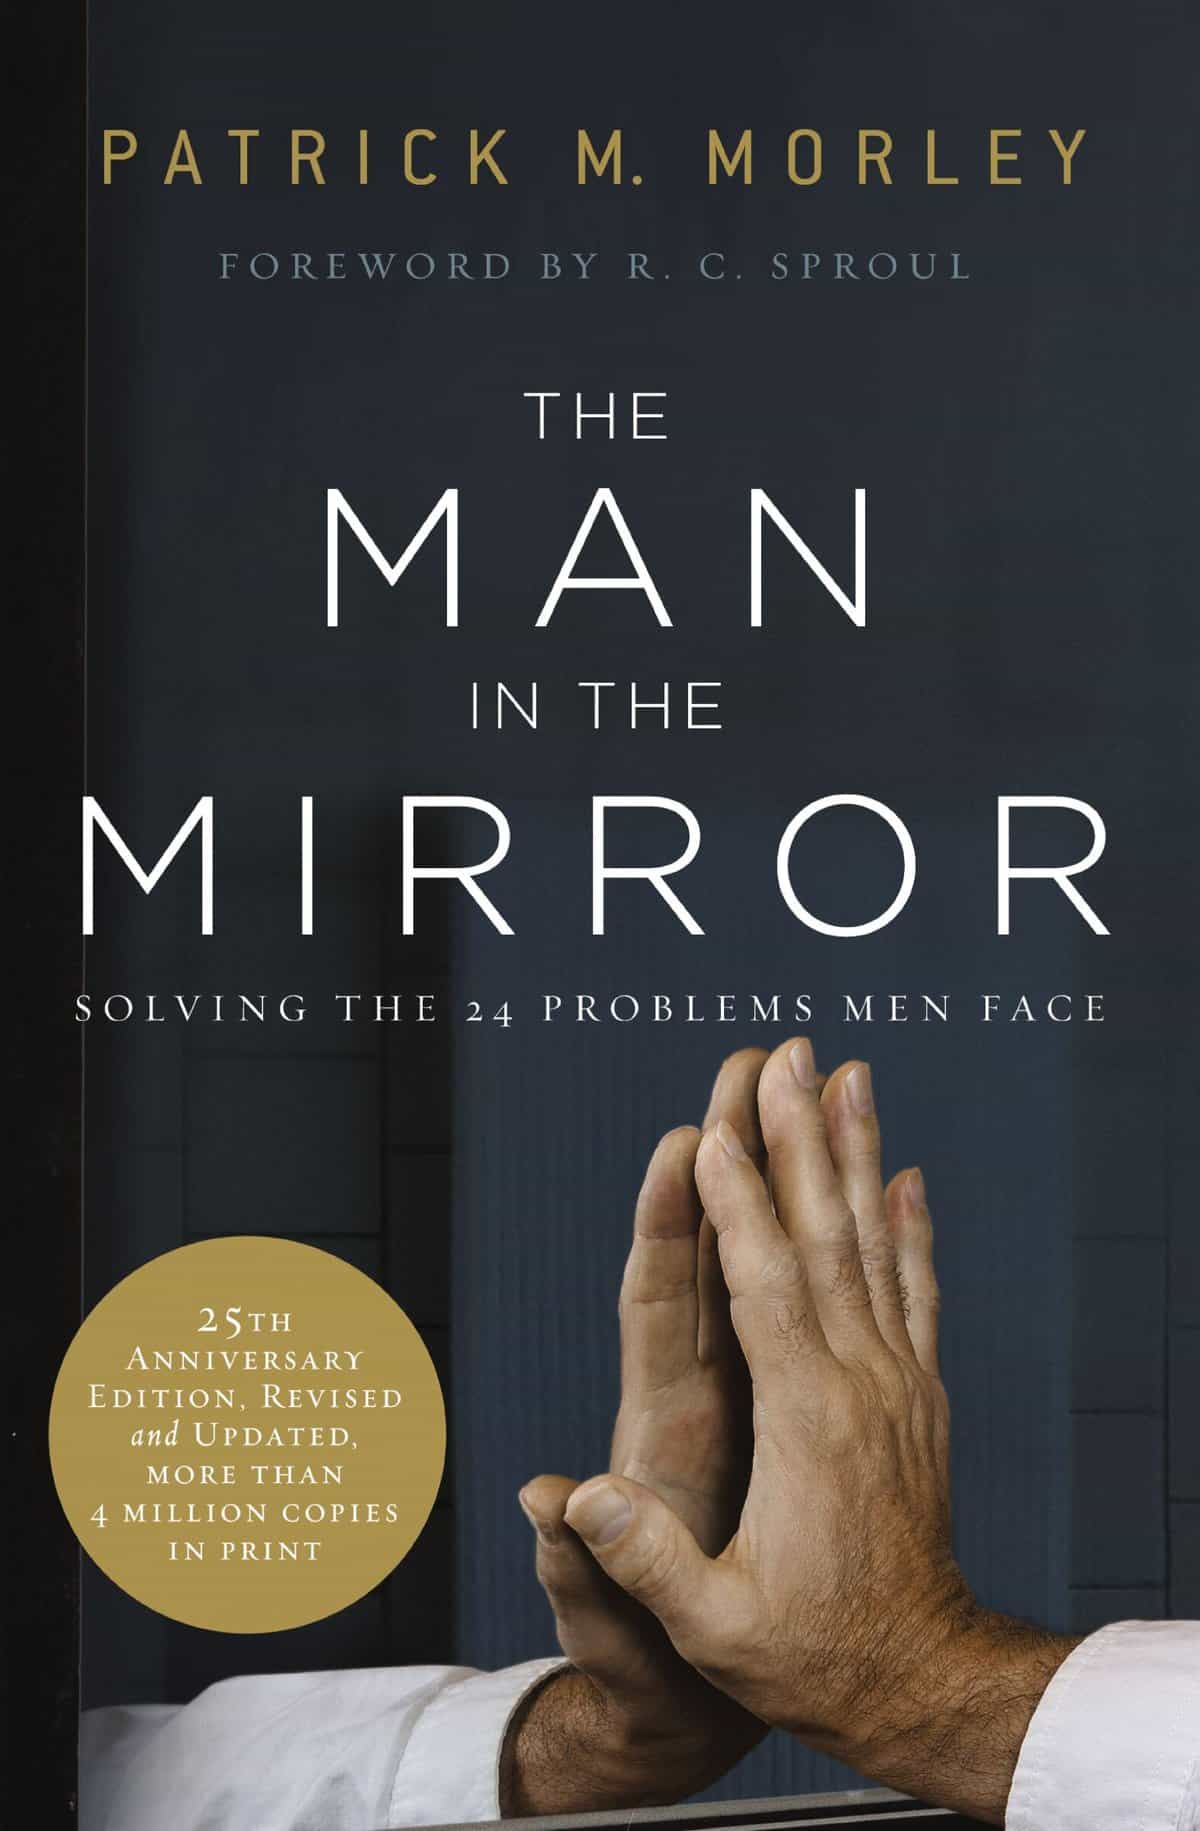 The Man in the Mirror – Solving the 24 Problems Men Face by Patrick M. Morley